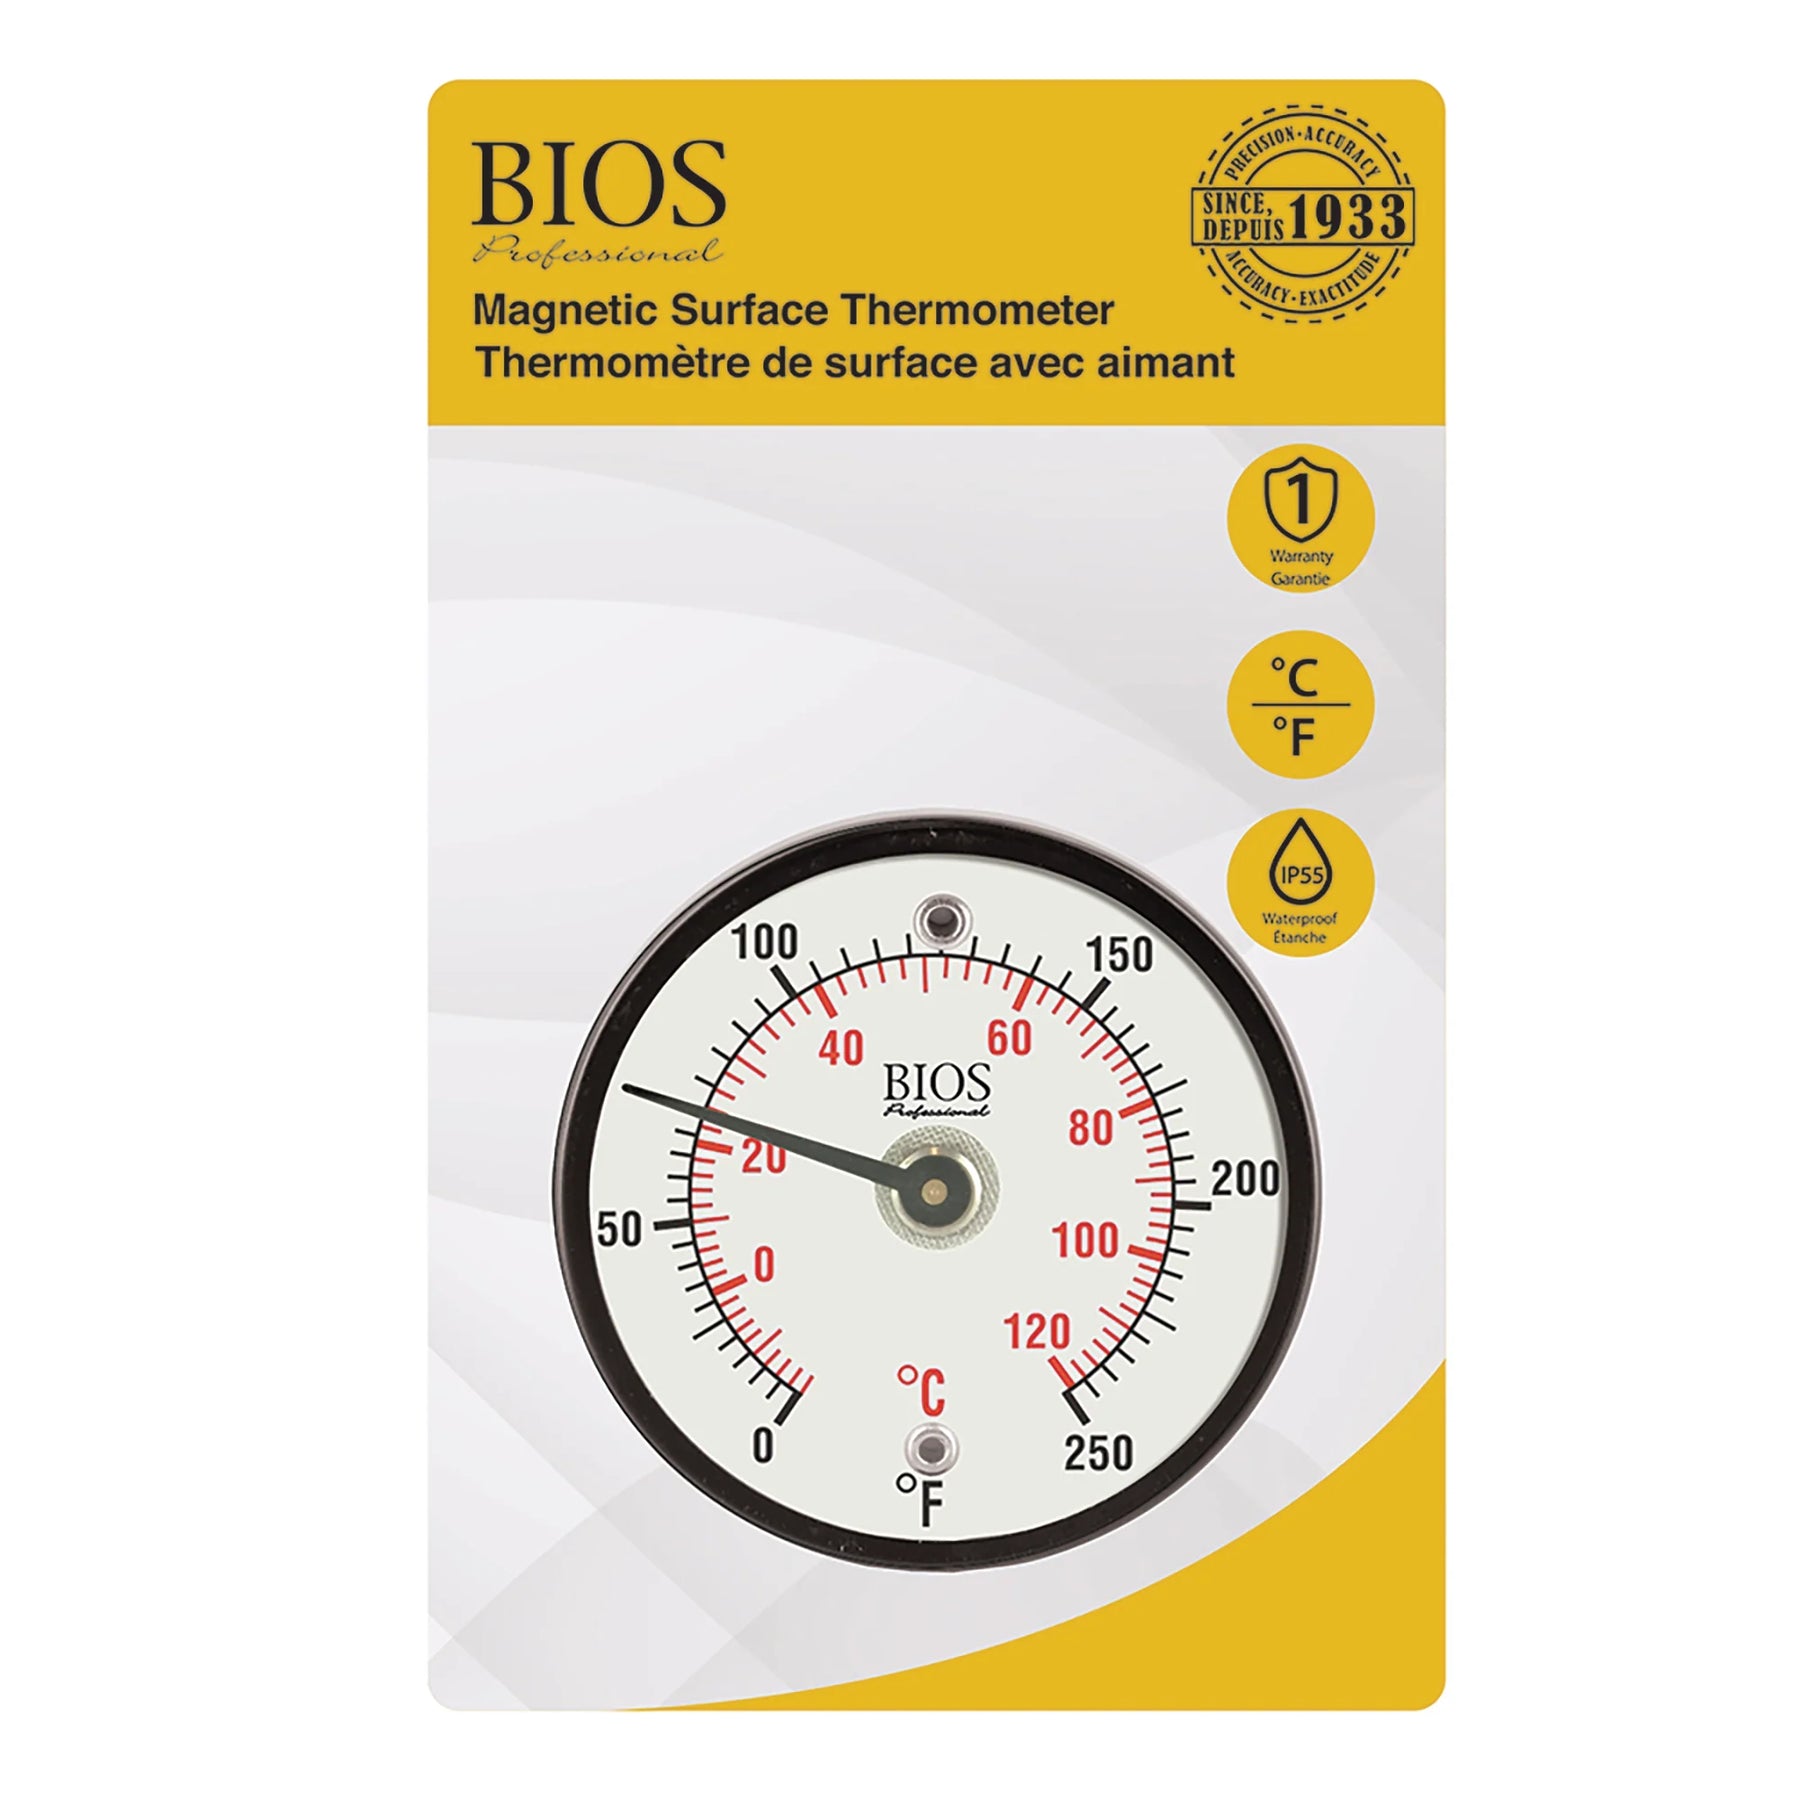 Thermor MAGNETIC SURFACE THERMOMETER DT500